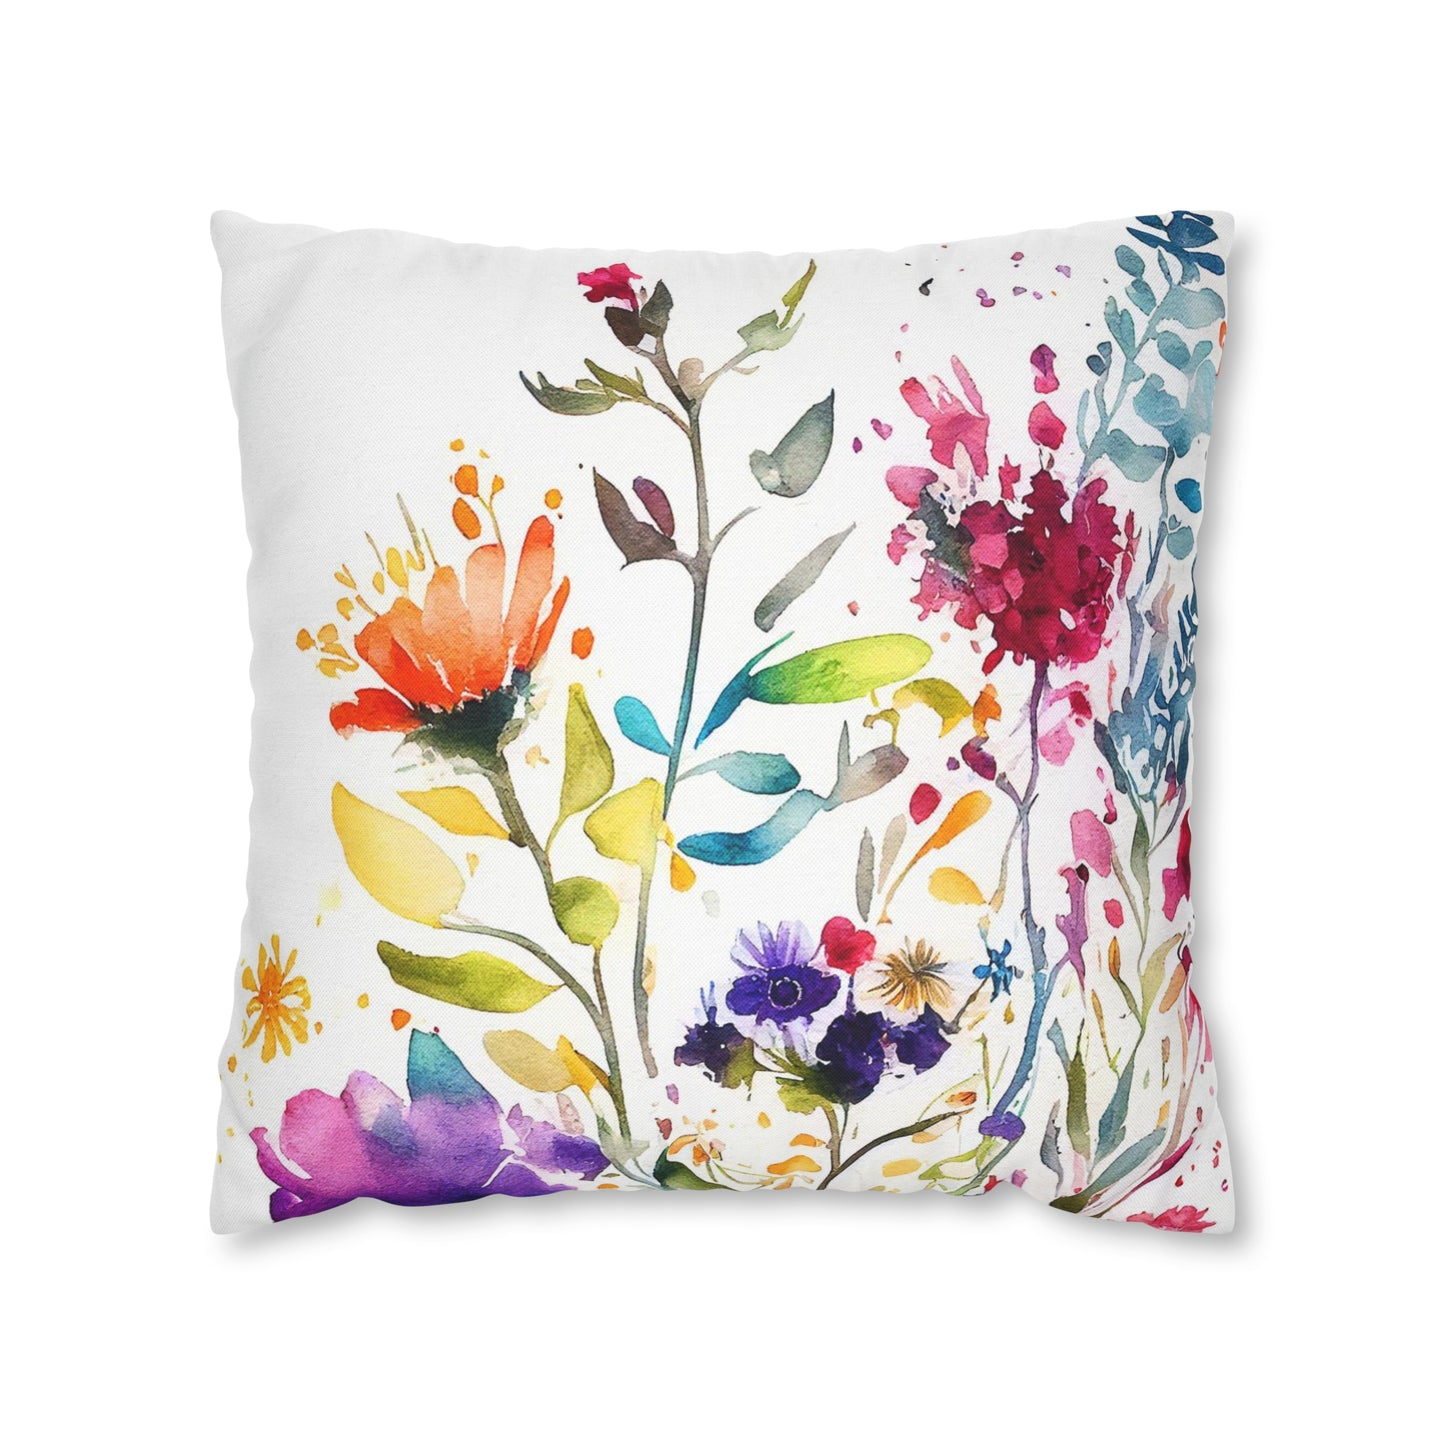 Watercolor Wildflowers Throw Pillow cover (2)